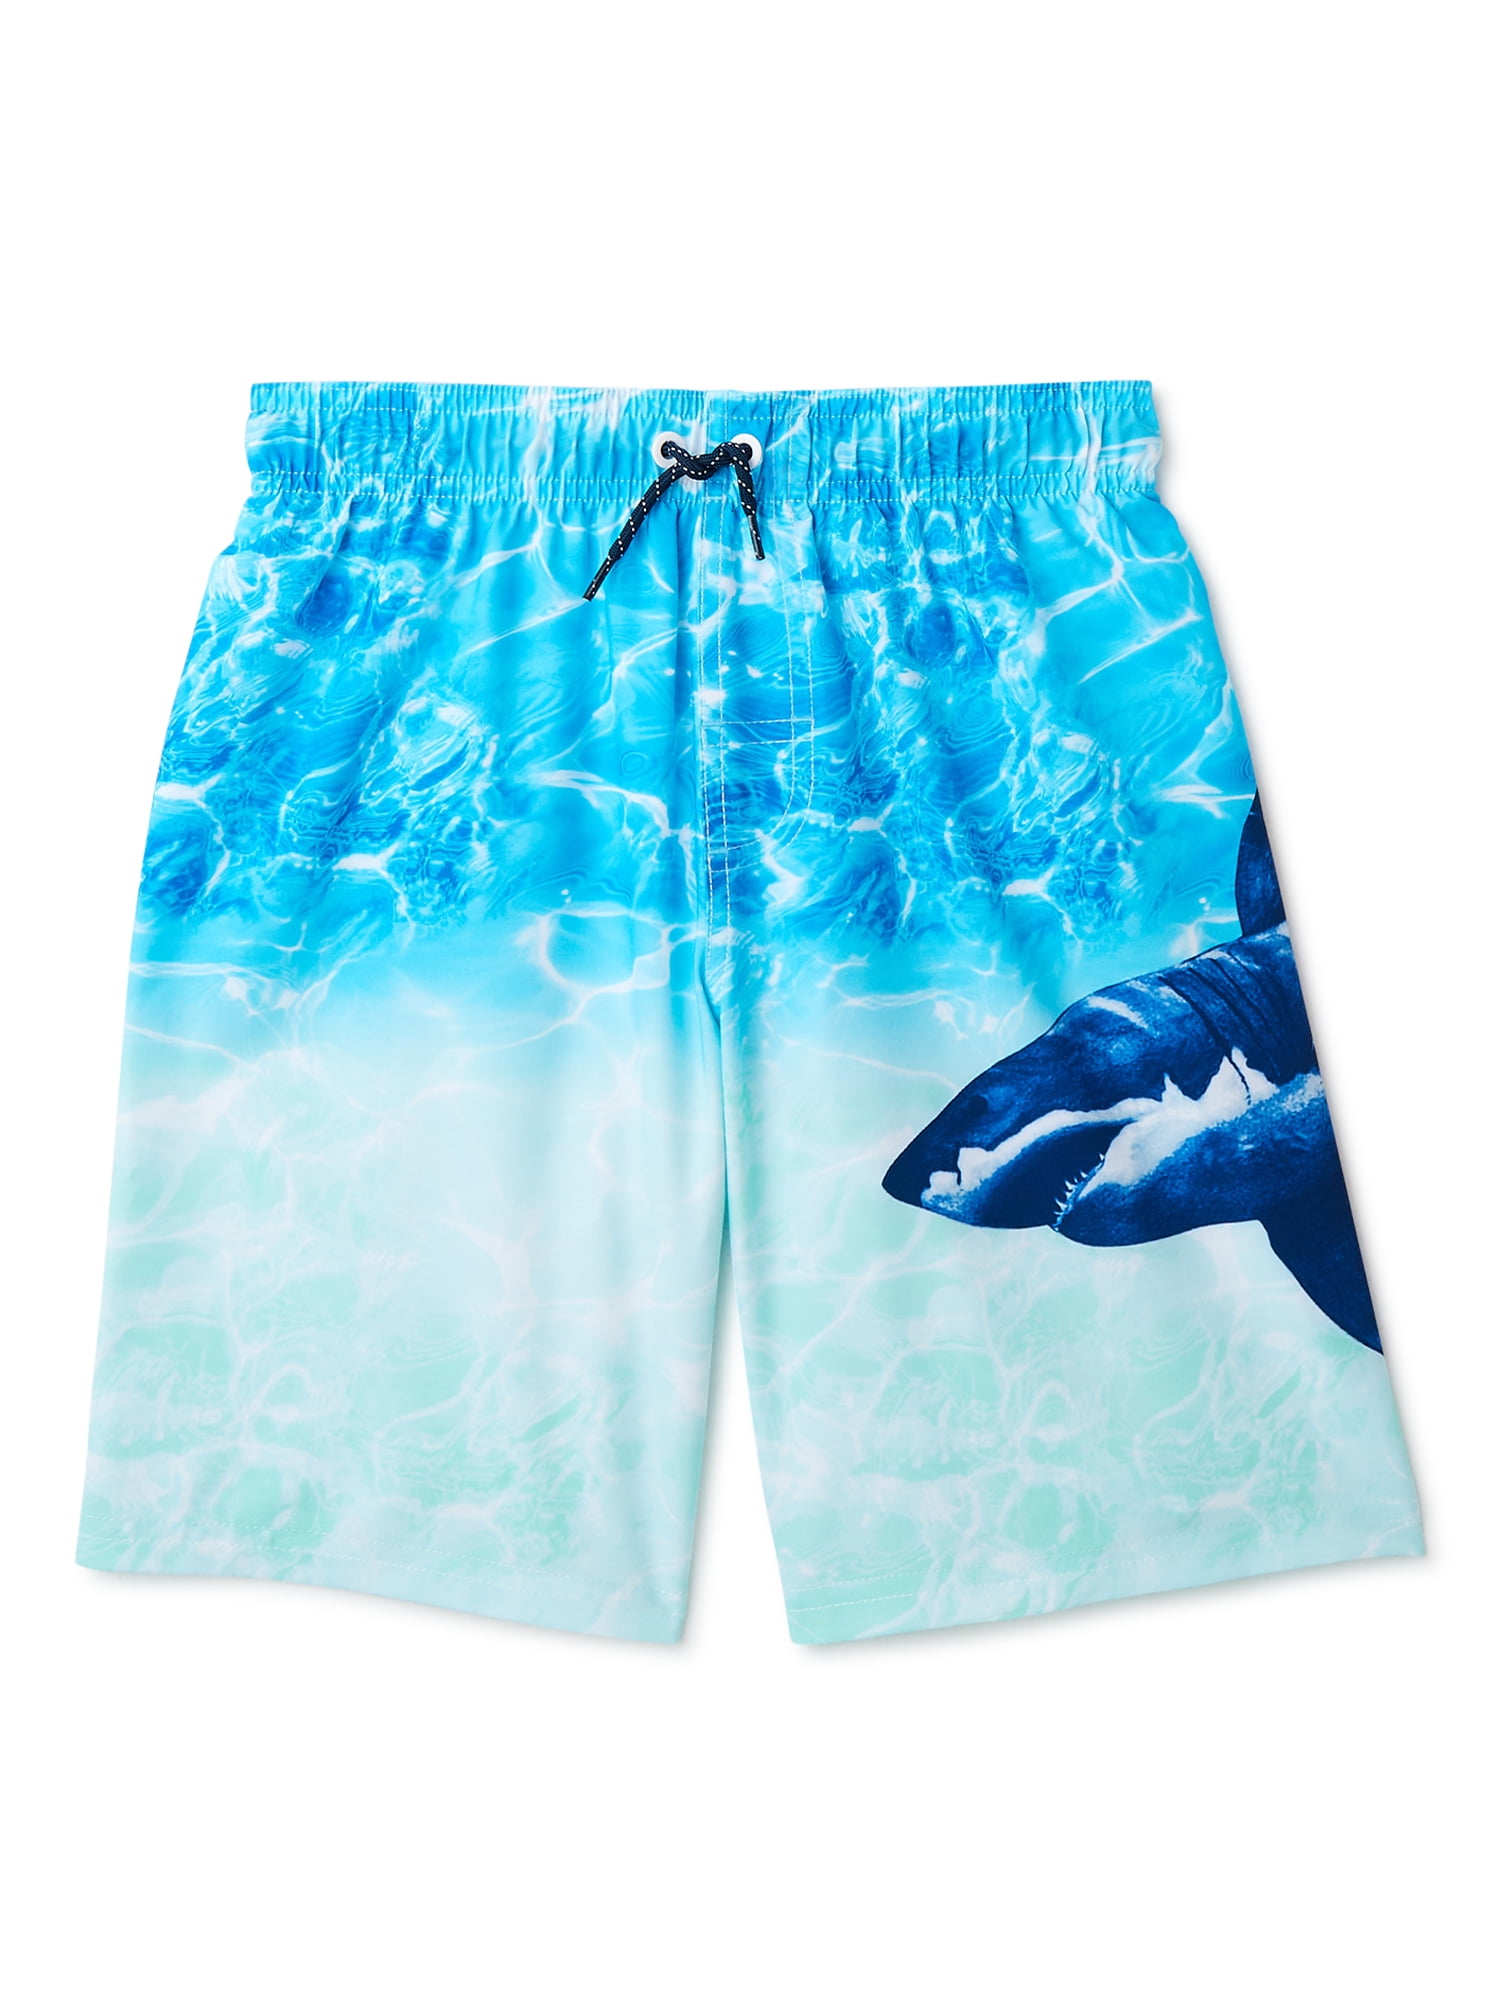 Jazz Solo Cup Pattern Mens Quick Dry Beach Shorts Swim Trunk Casual Classic Shorts